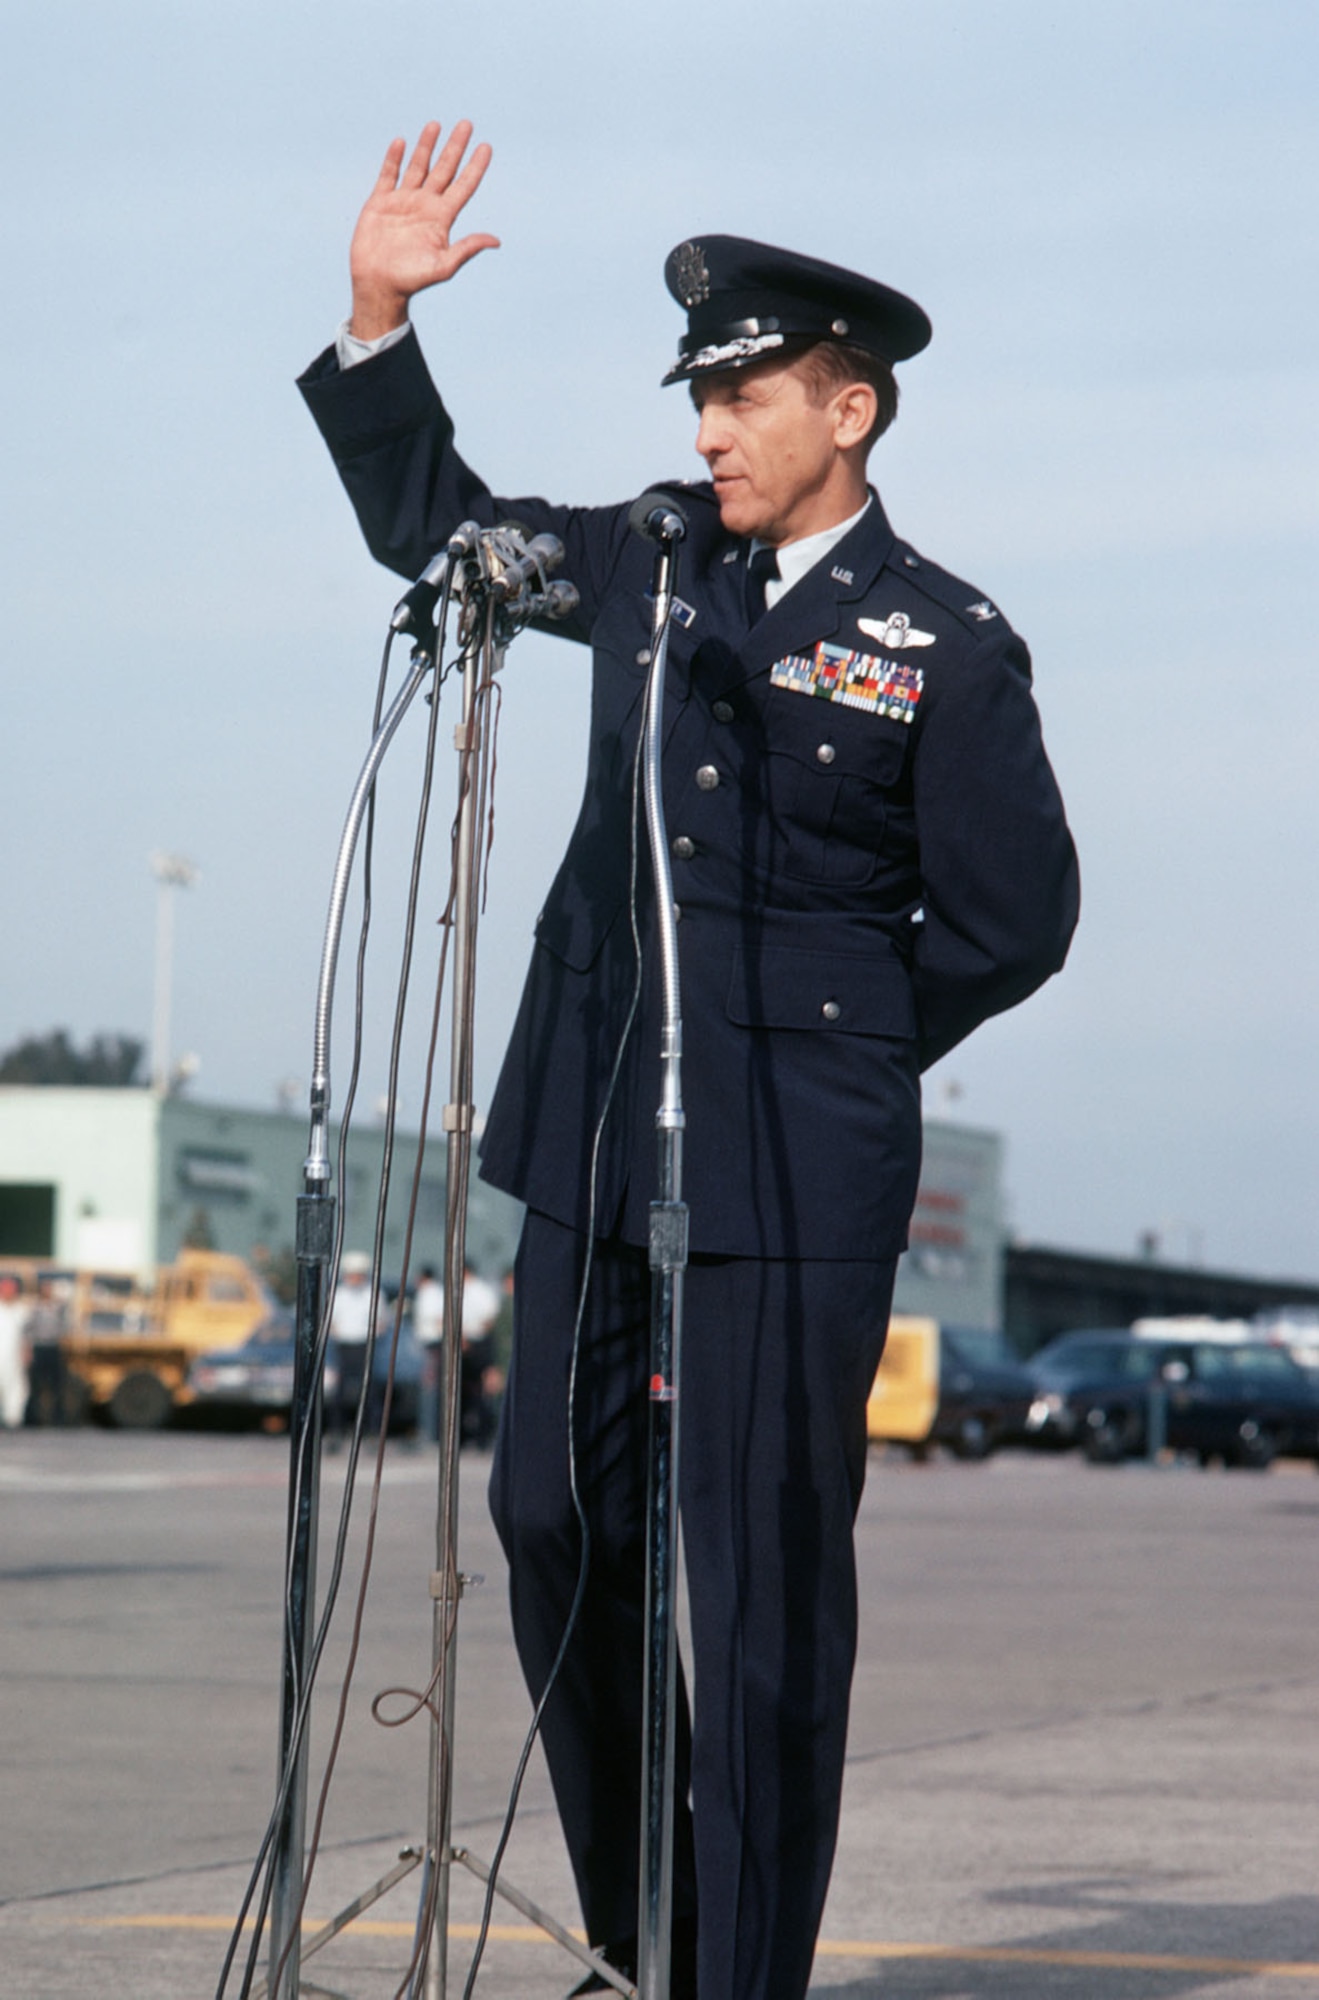 Col. Robinson Risner addresses the crowd in a new uniform. Promoted while in prison, he had been a colonel for several years, but he had never worn his new rank. (U.S. Air Force photo)